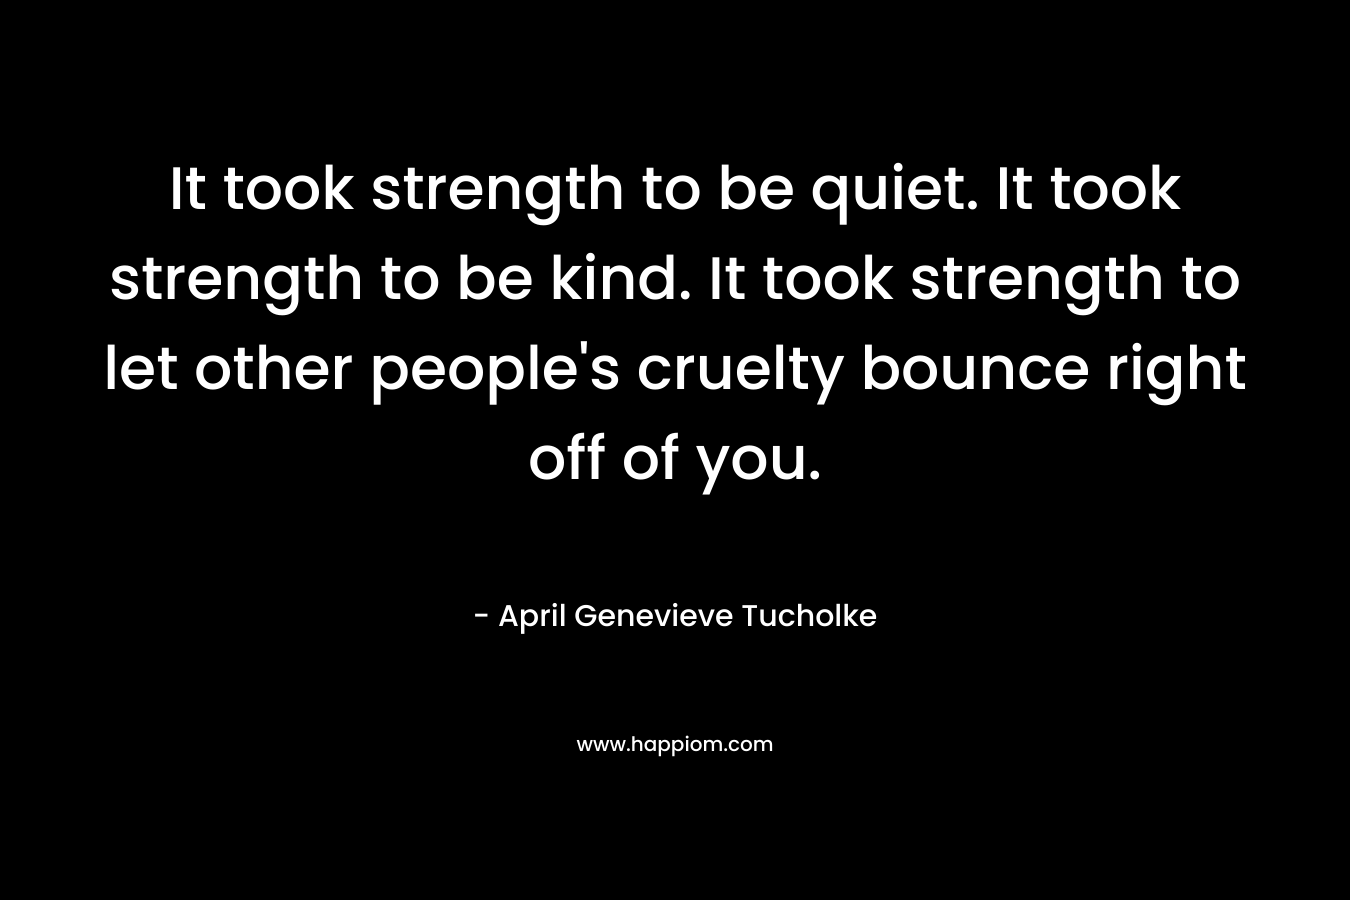 It took strength to be quiet. It took strength to be kind. It took strength to let other people's cruelty bounce right off of you.